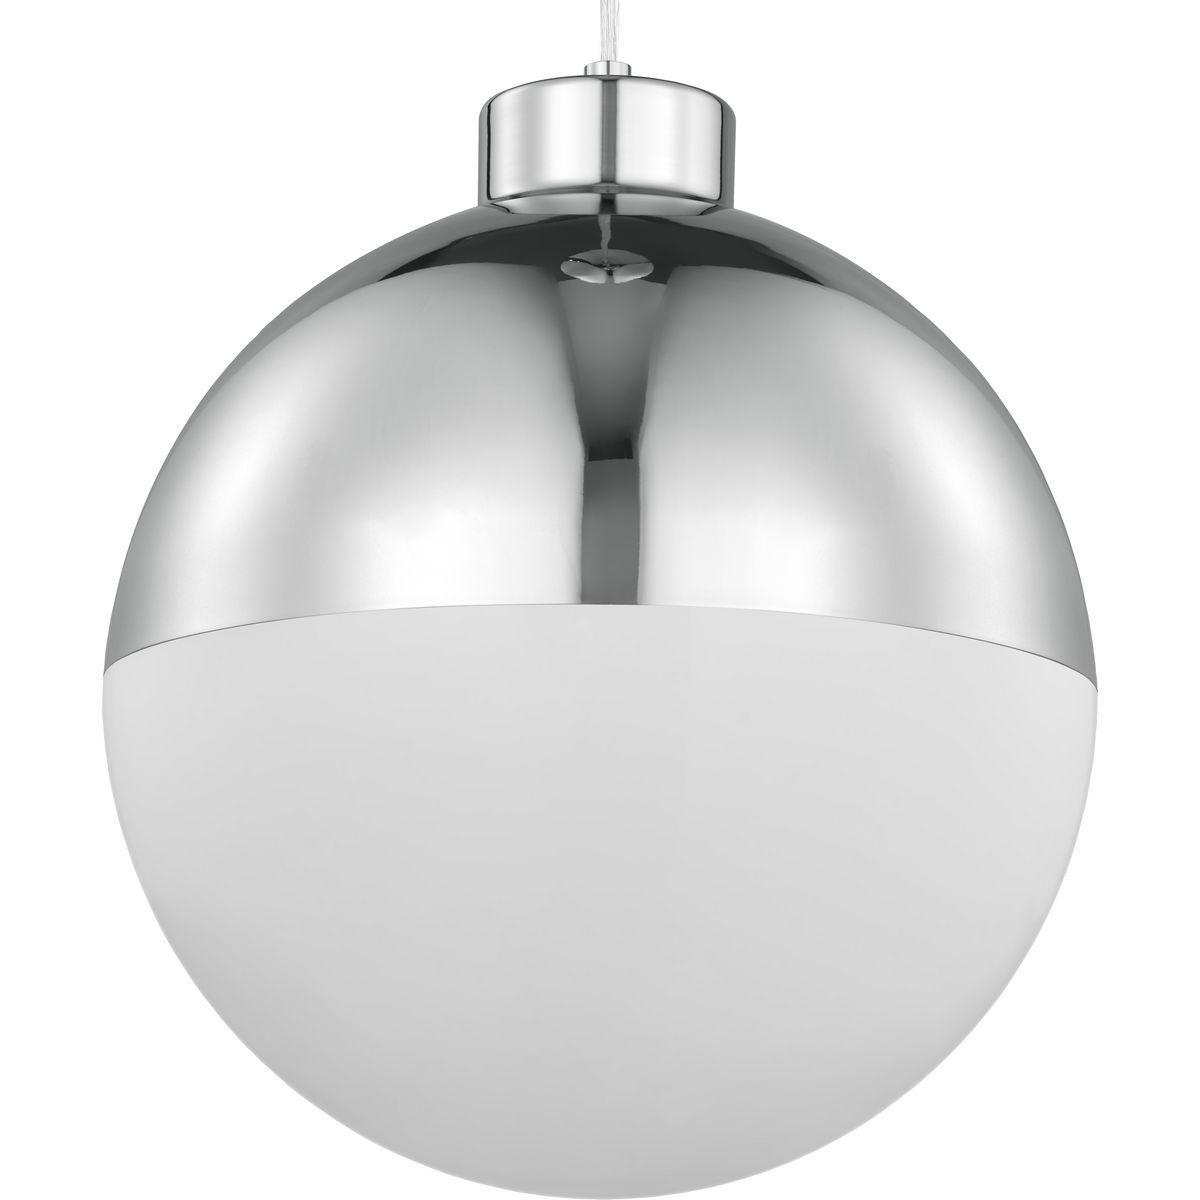 Hubbell P500148-015-30 A distinctive classic globe pendant is accented by a striking metal polished chrome cap. The cap holds a beautiful opal glass shade ready to emit gentle illumination. This versatile pendant can be displayed as a single fixture or in groups of two or more 